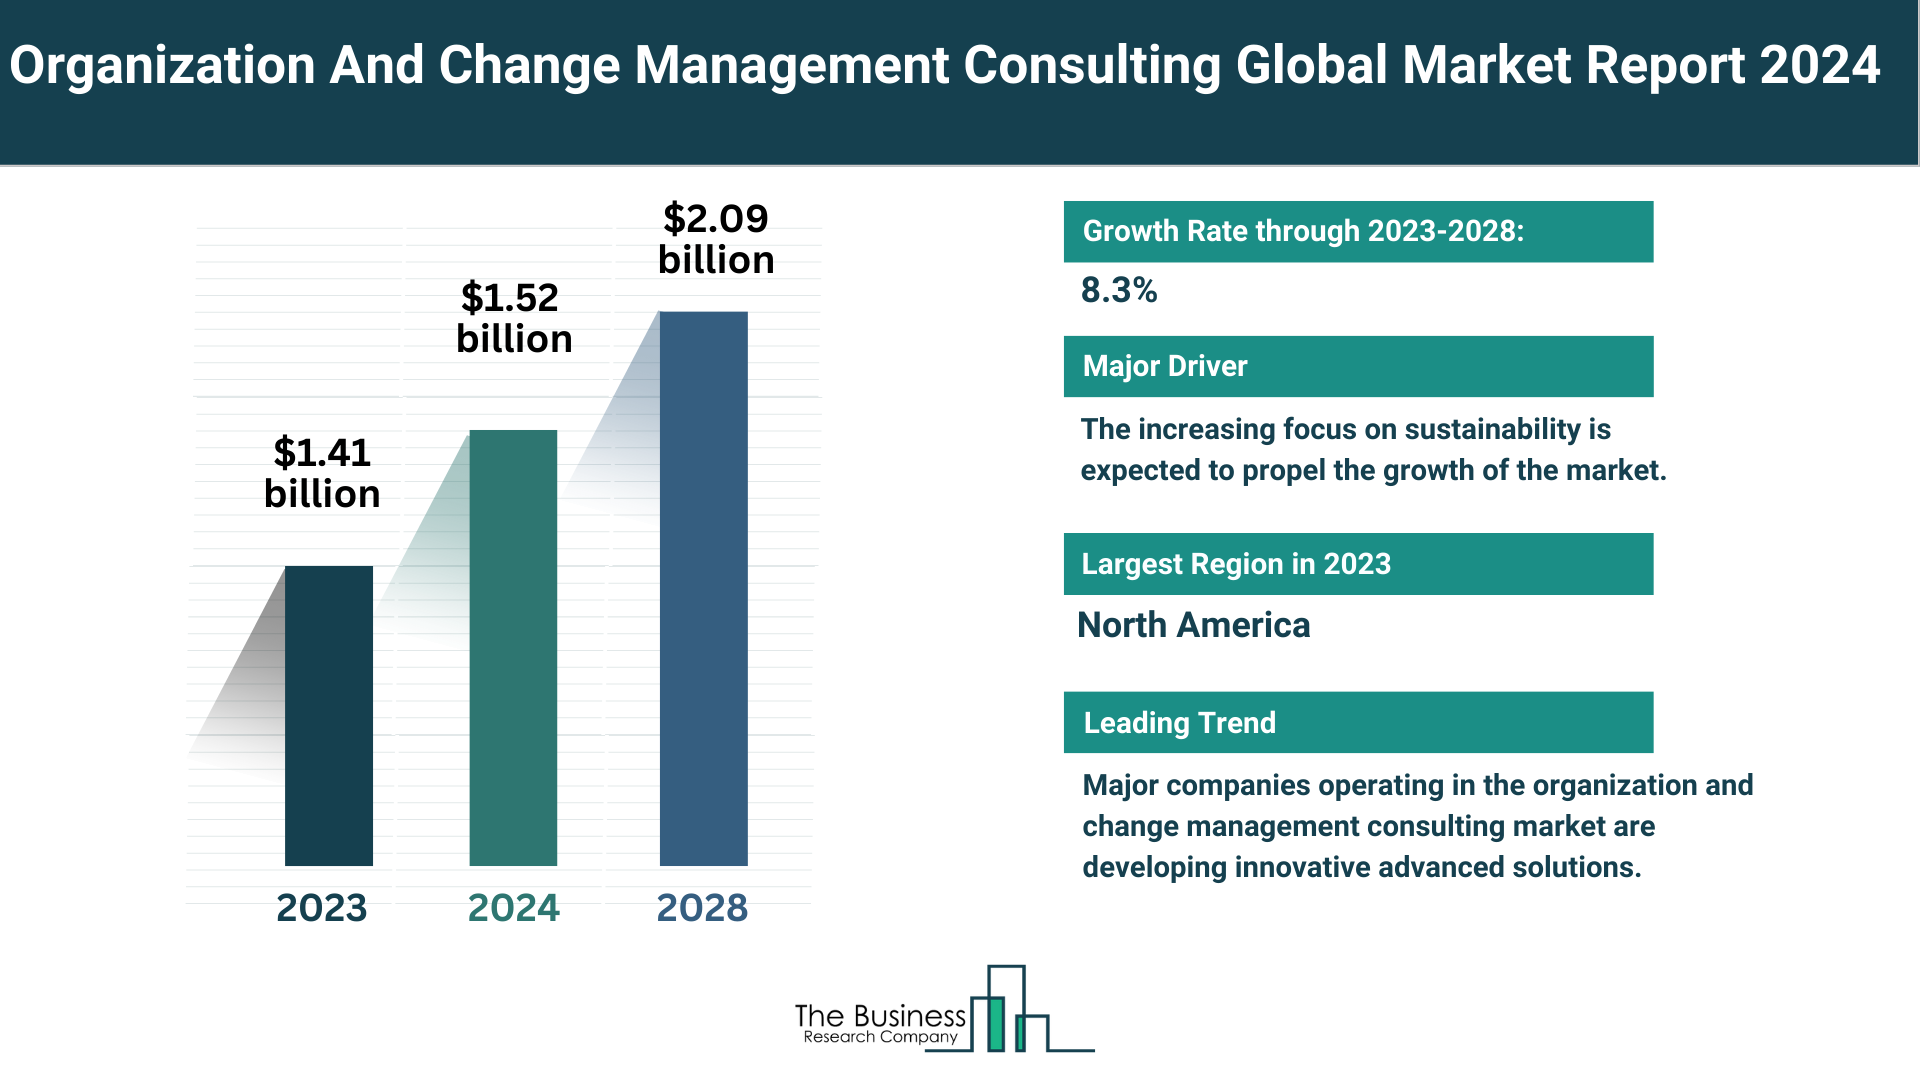 Global Organization And Change Management Consulting Market Analysis: Size, Drivers, Trends, Opportunities And Strategies